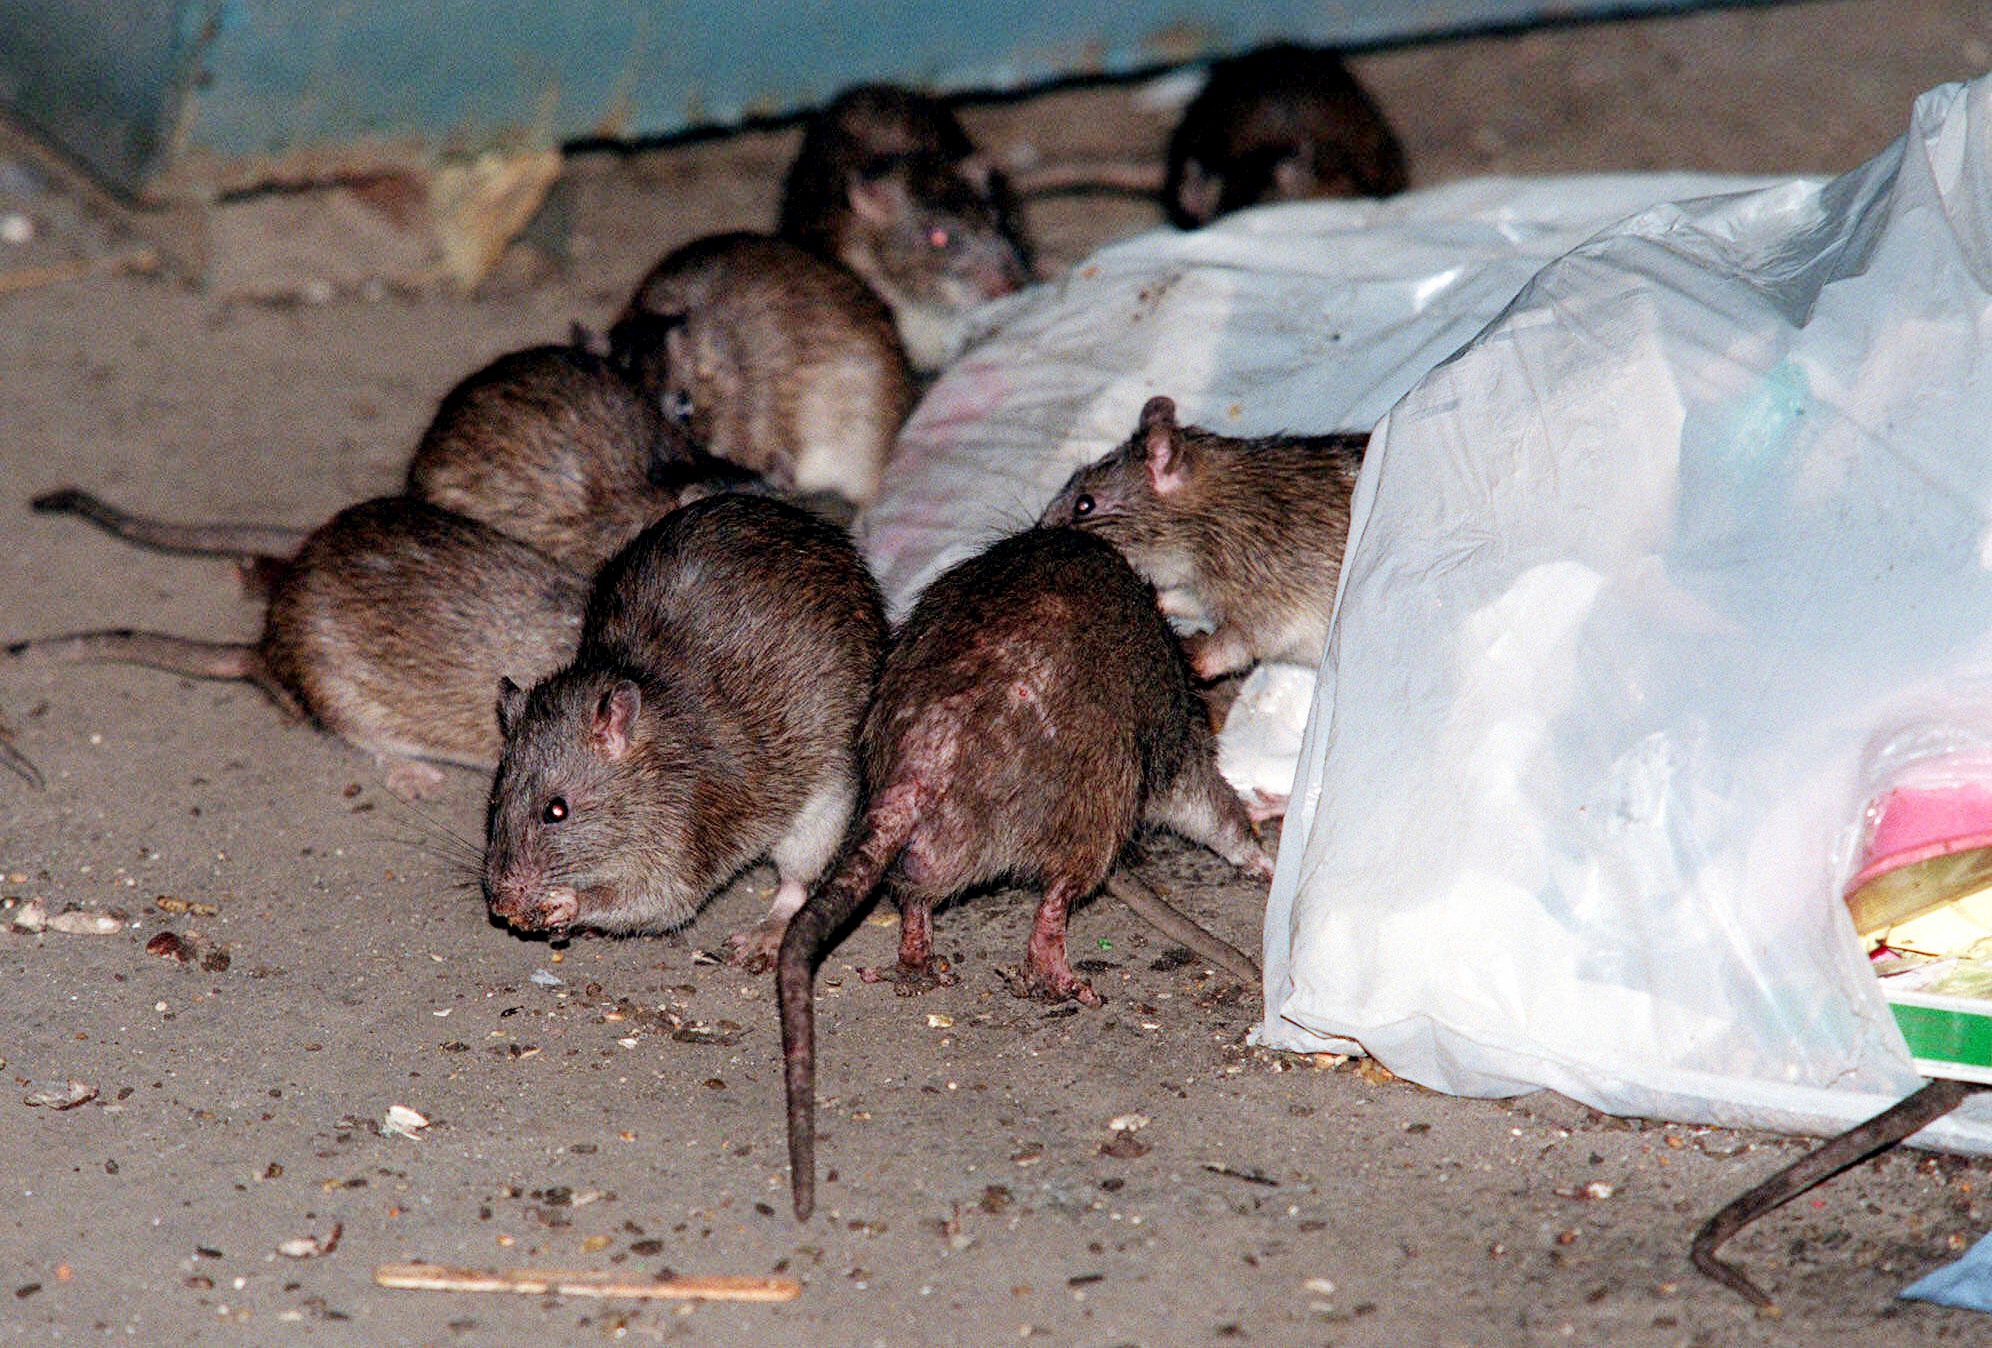 Rats swarm around a bag of garbage near a dumpster in New York City (stock image)